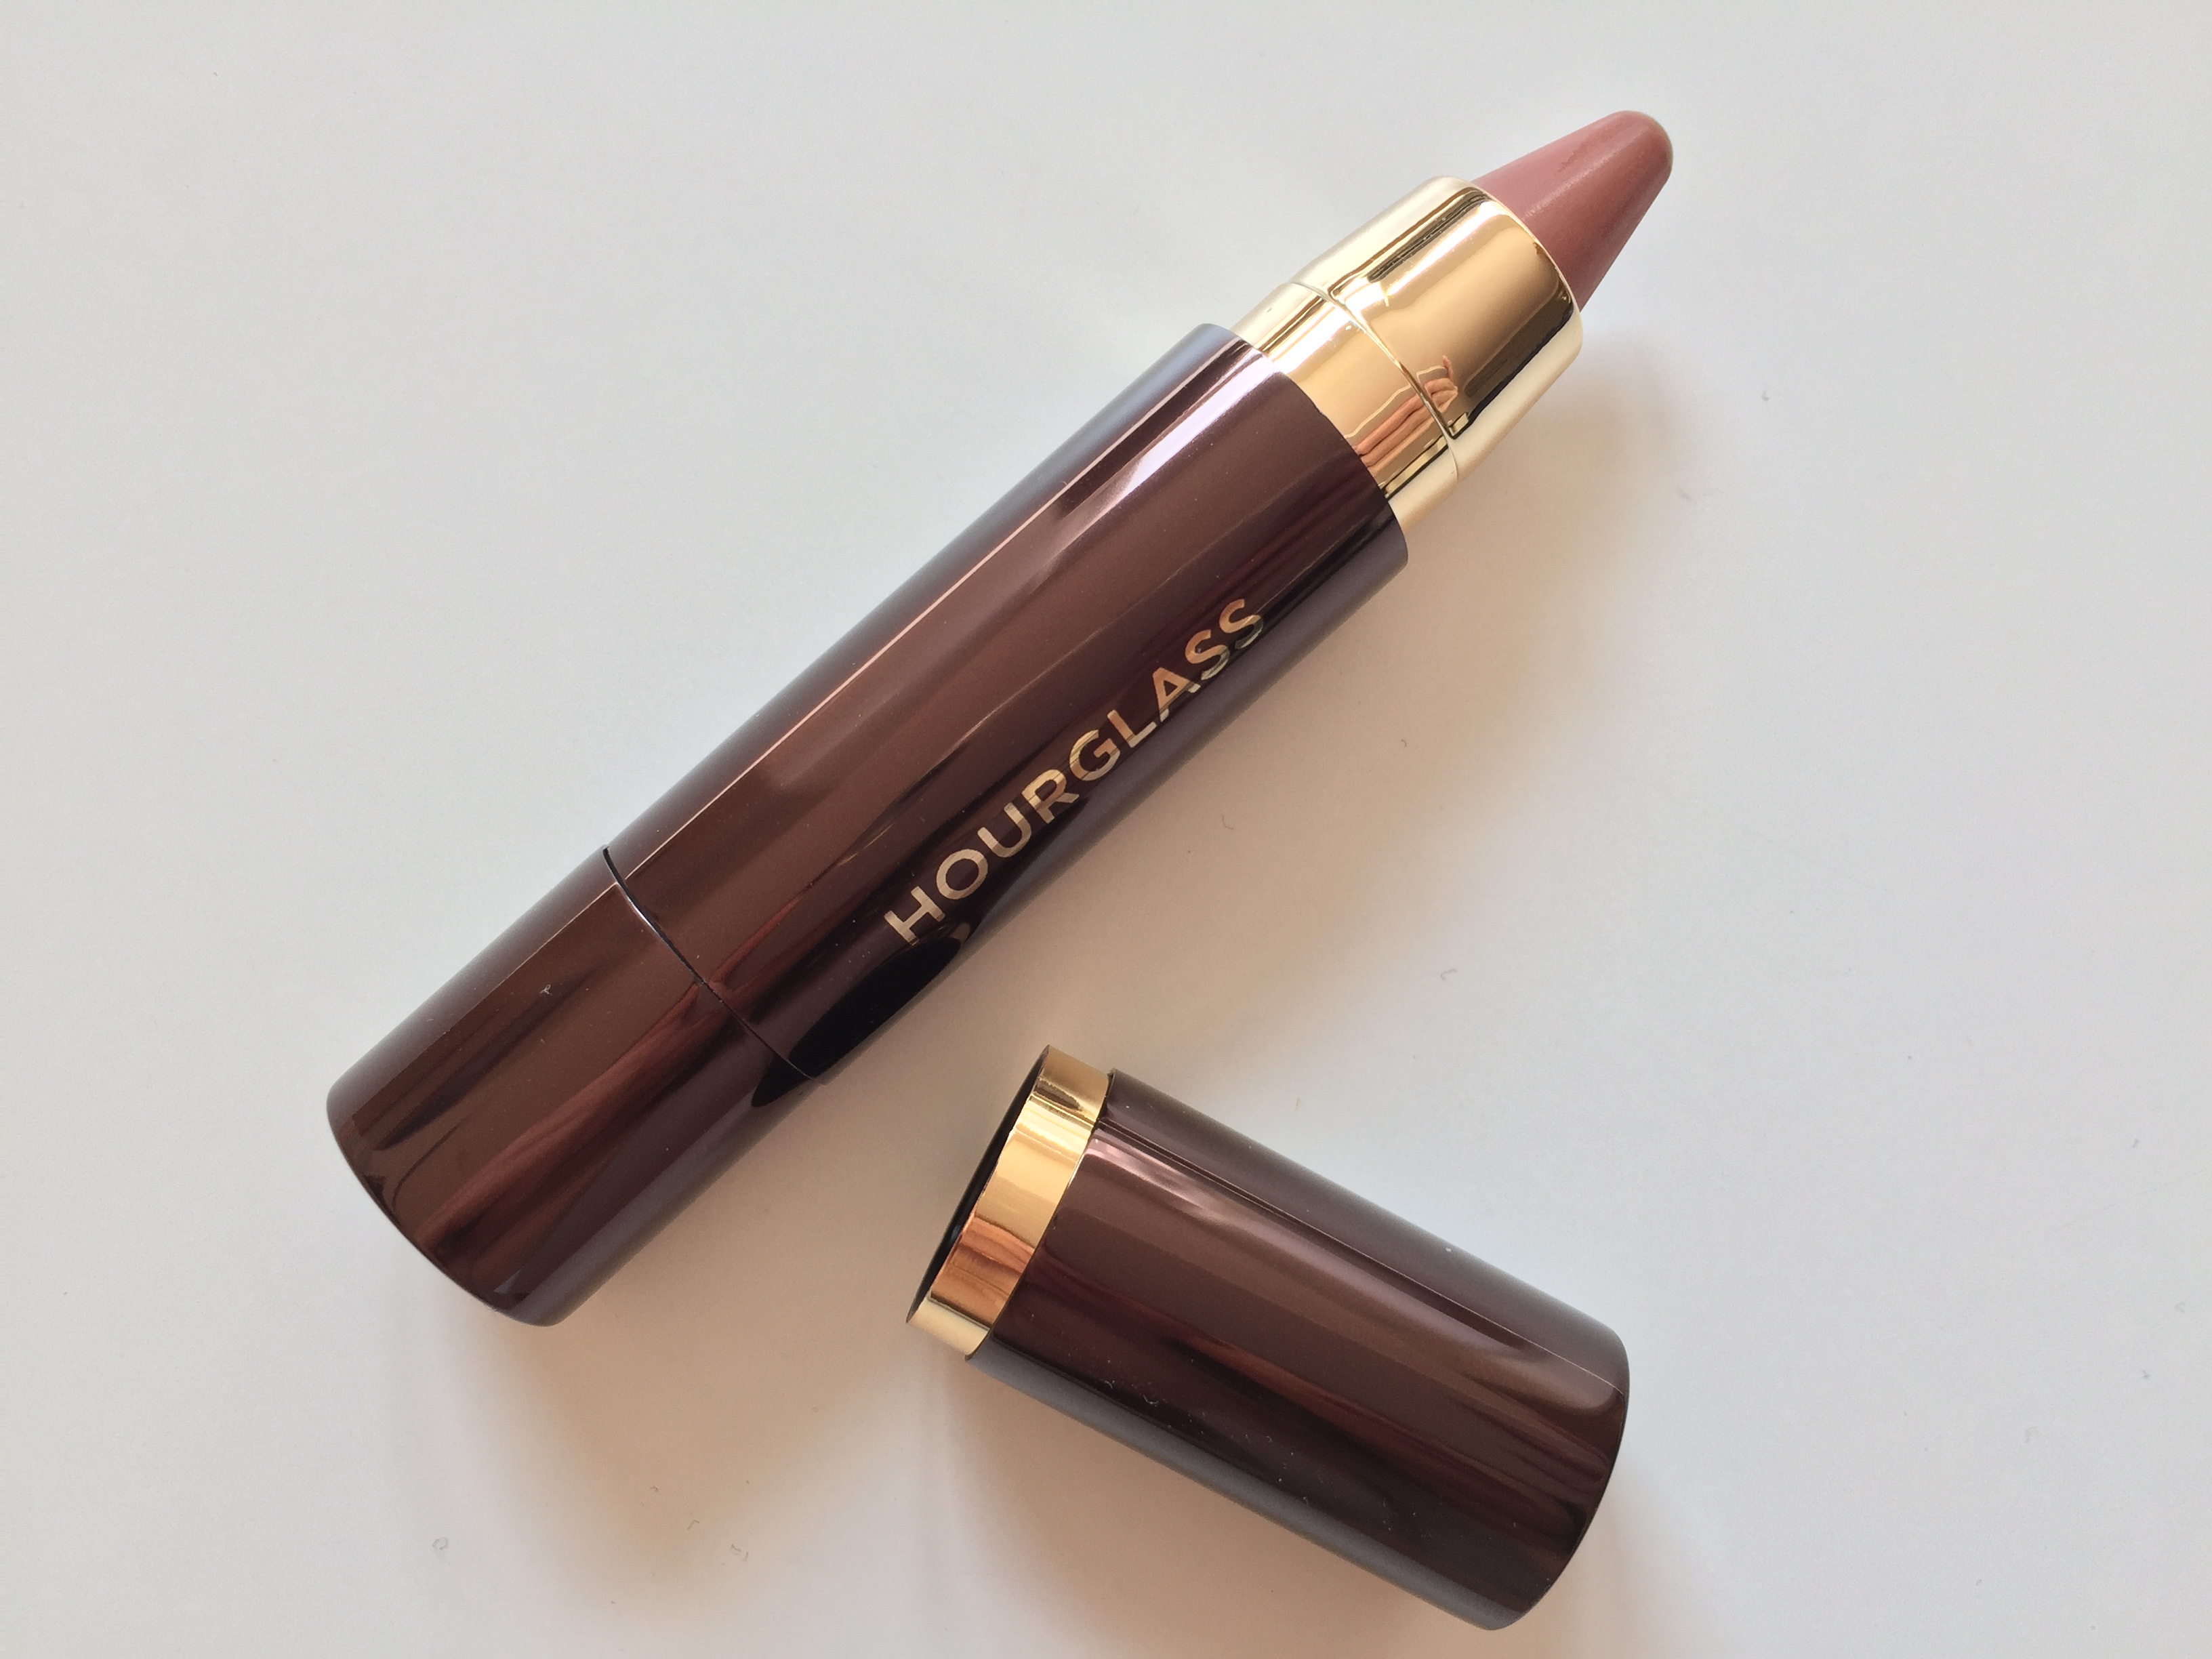 Hourglass GIRL Lip Stylo review by facemadeup.com